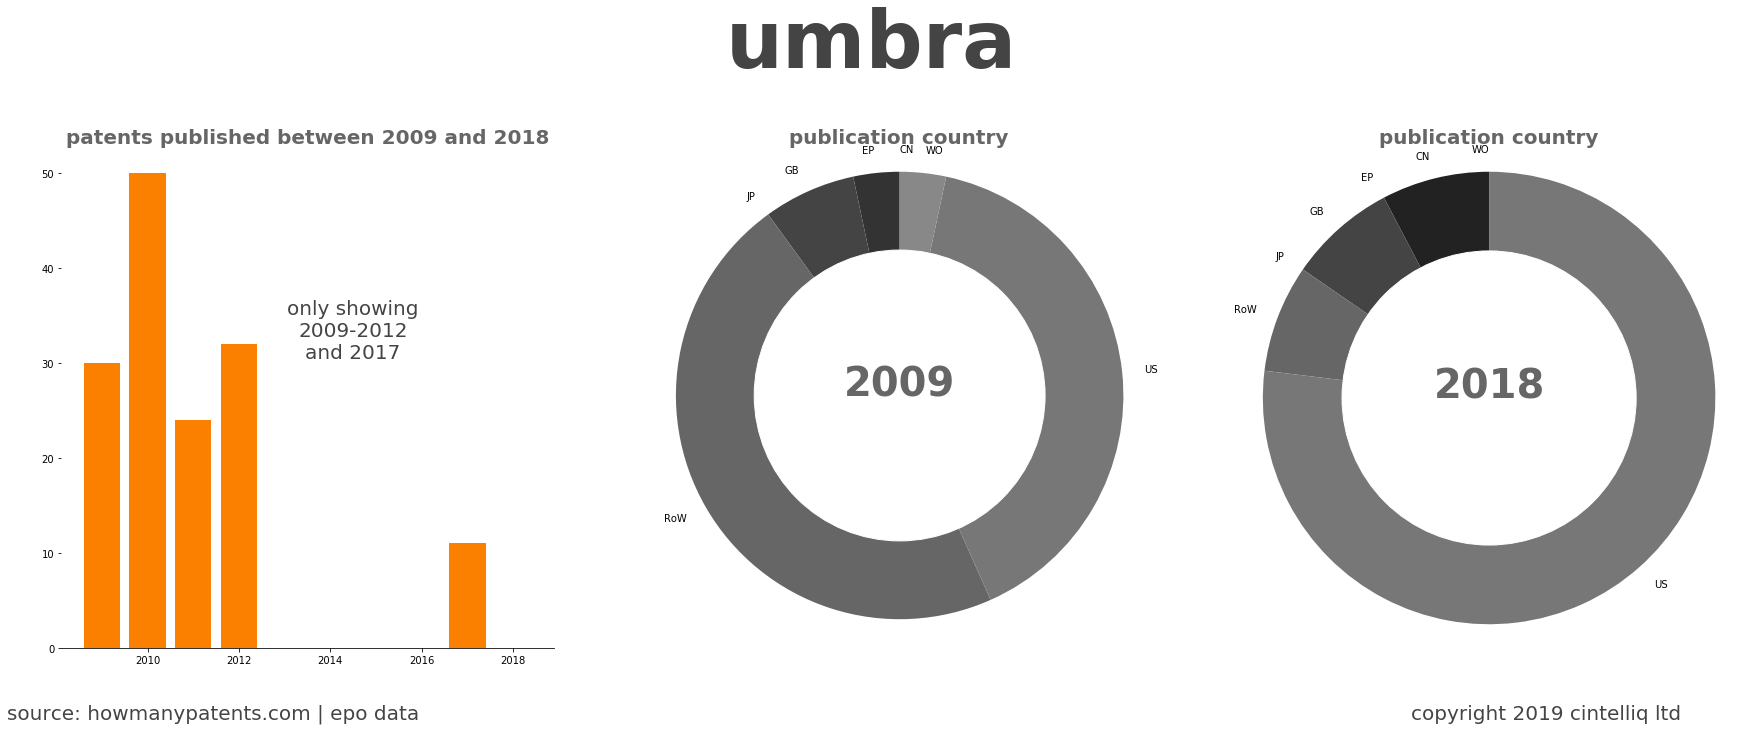 summary of patents for Umbra